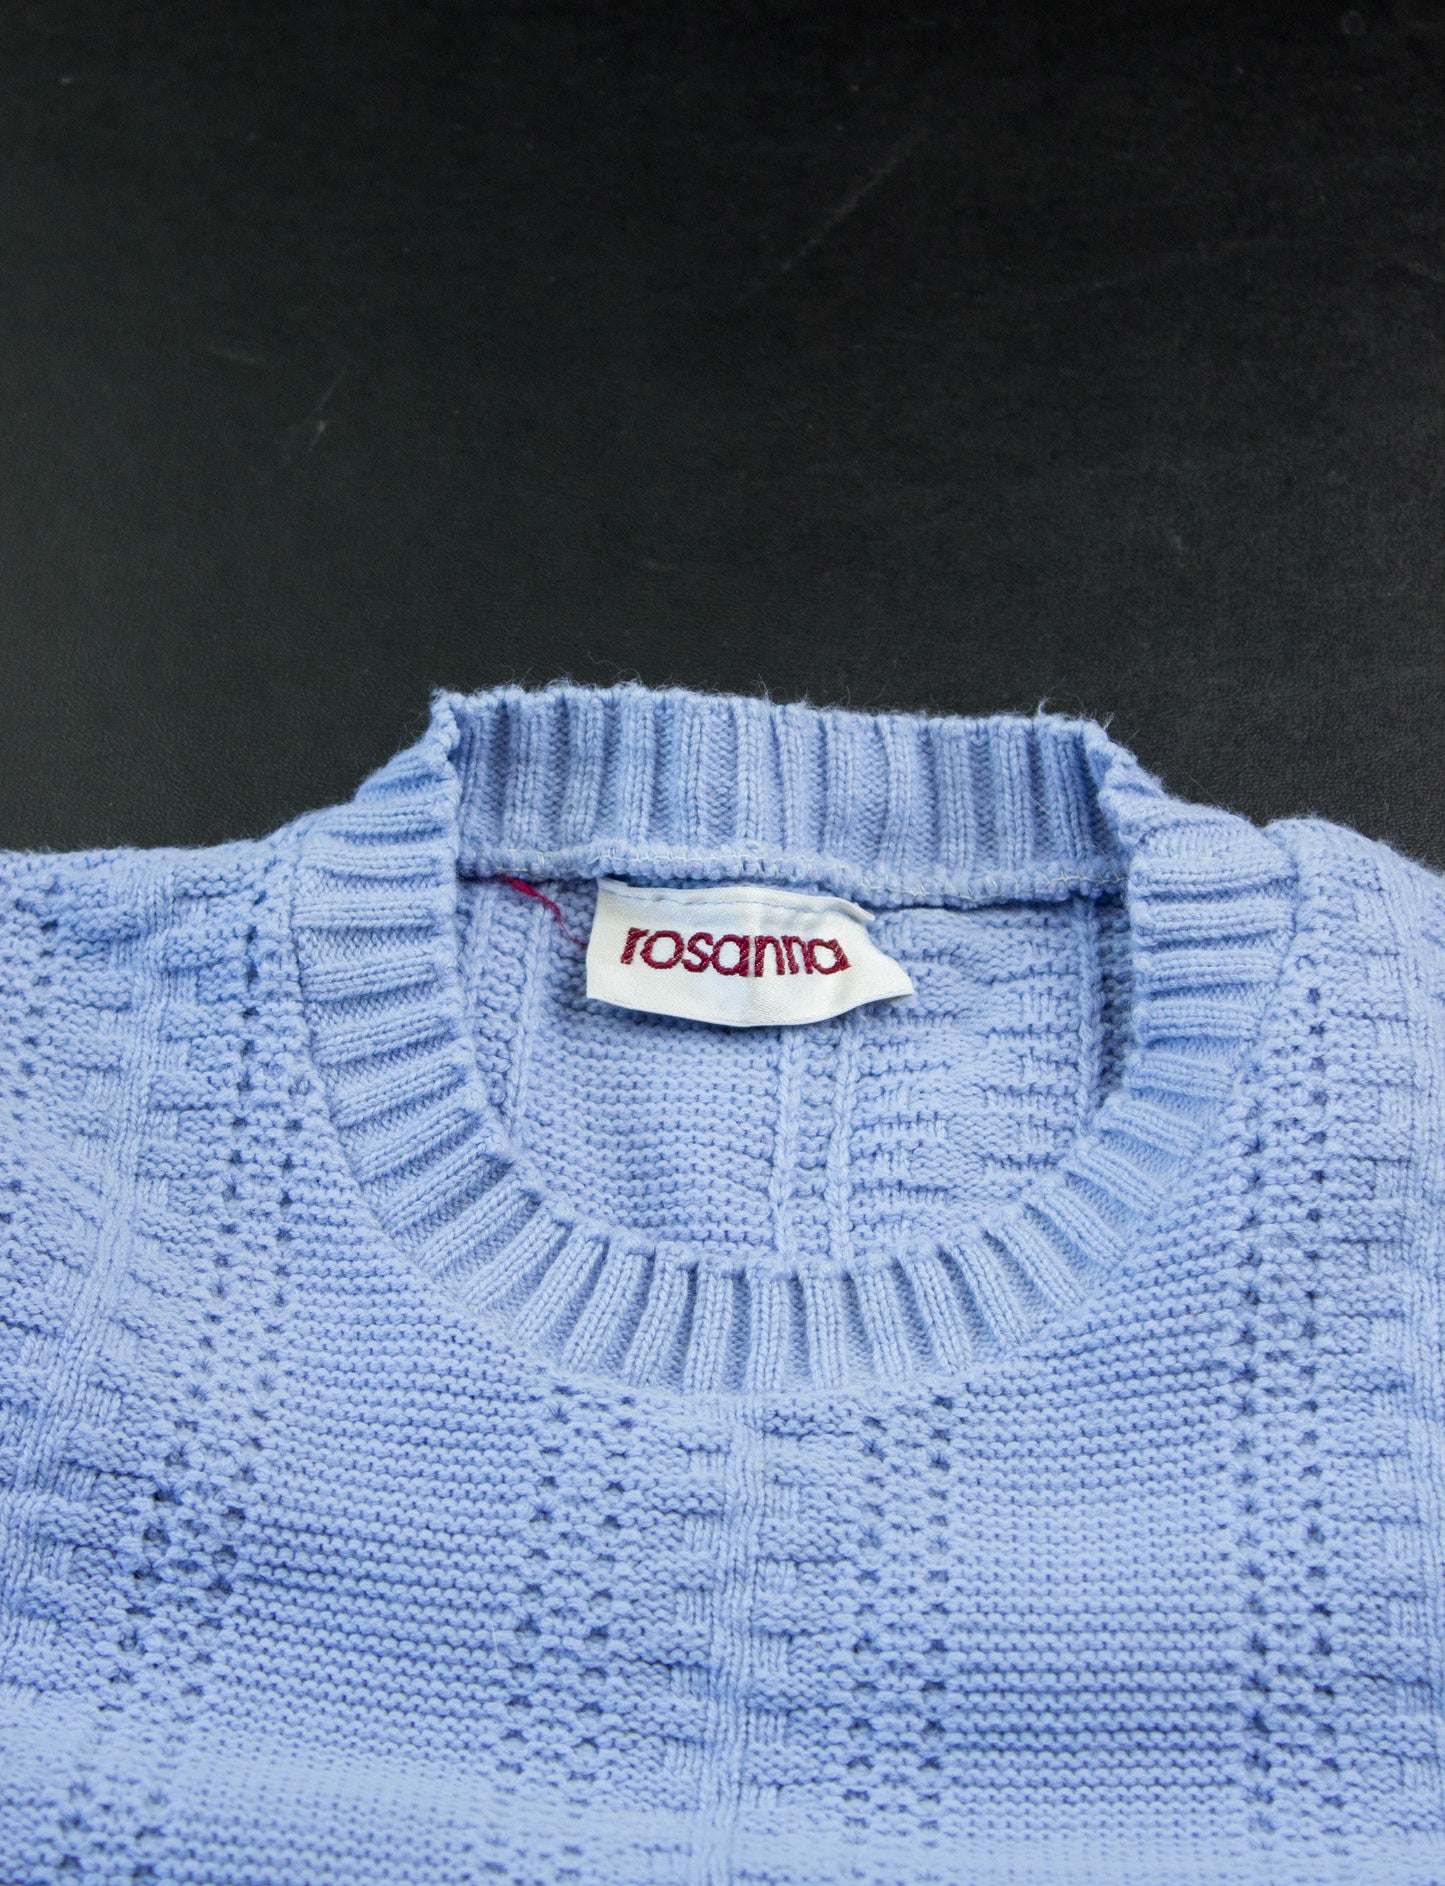 Vintage 70's Women's Baby Blue Crewneck Sweater Small By Rosanna